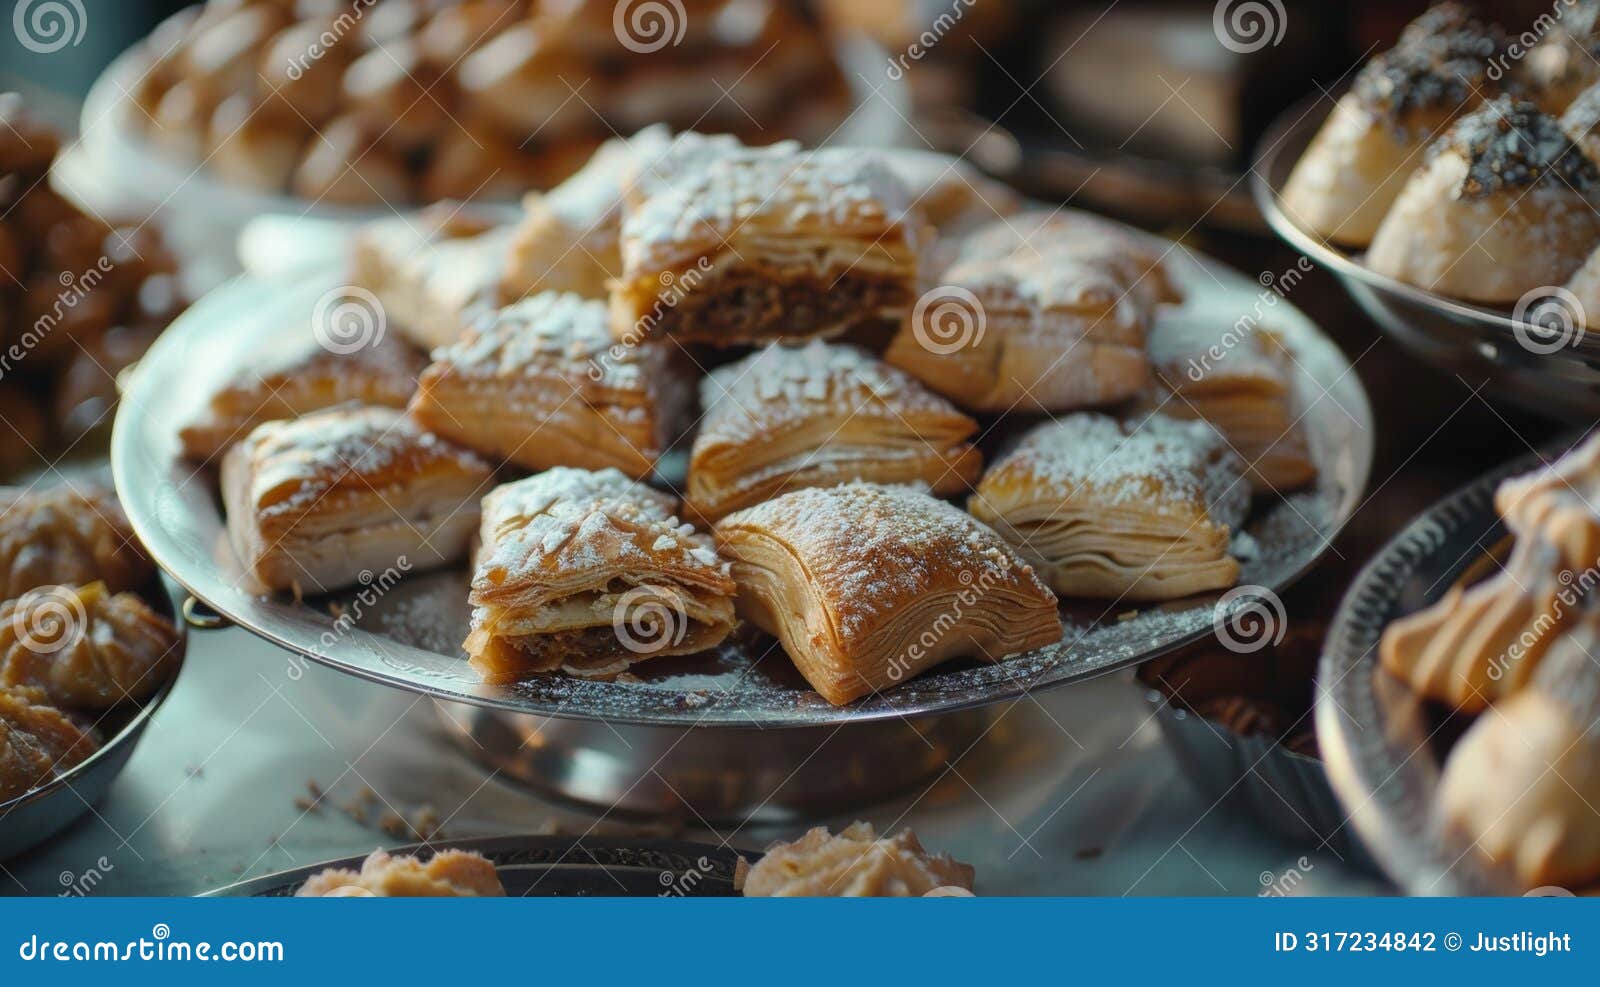 the aroma of freshly baked pastries and savory dishes wafting through the air a common sight during ramadan as families